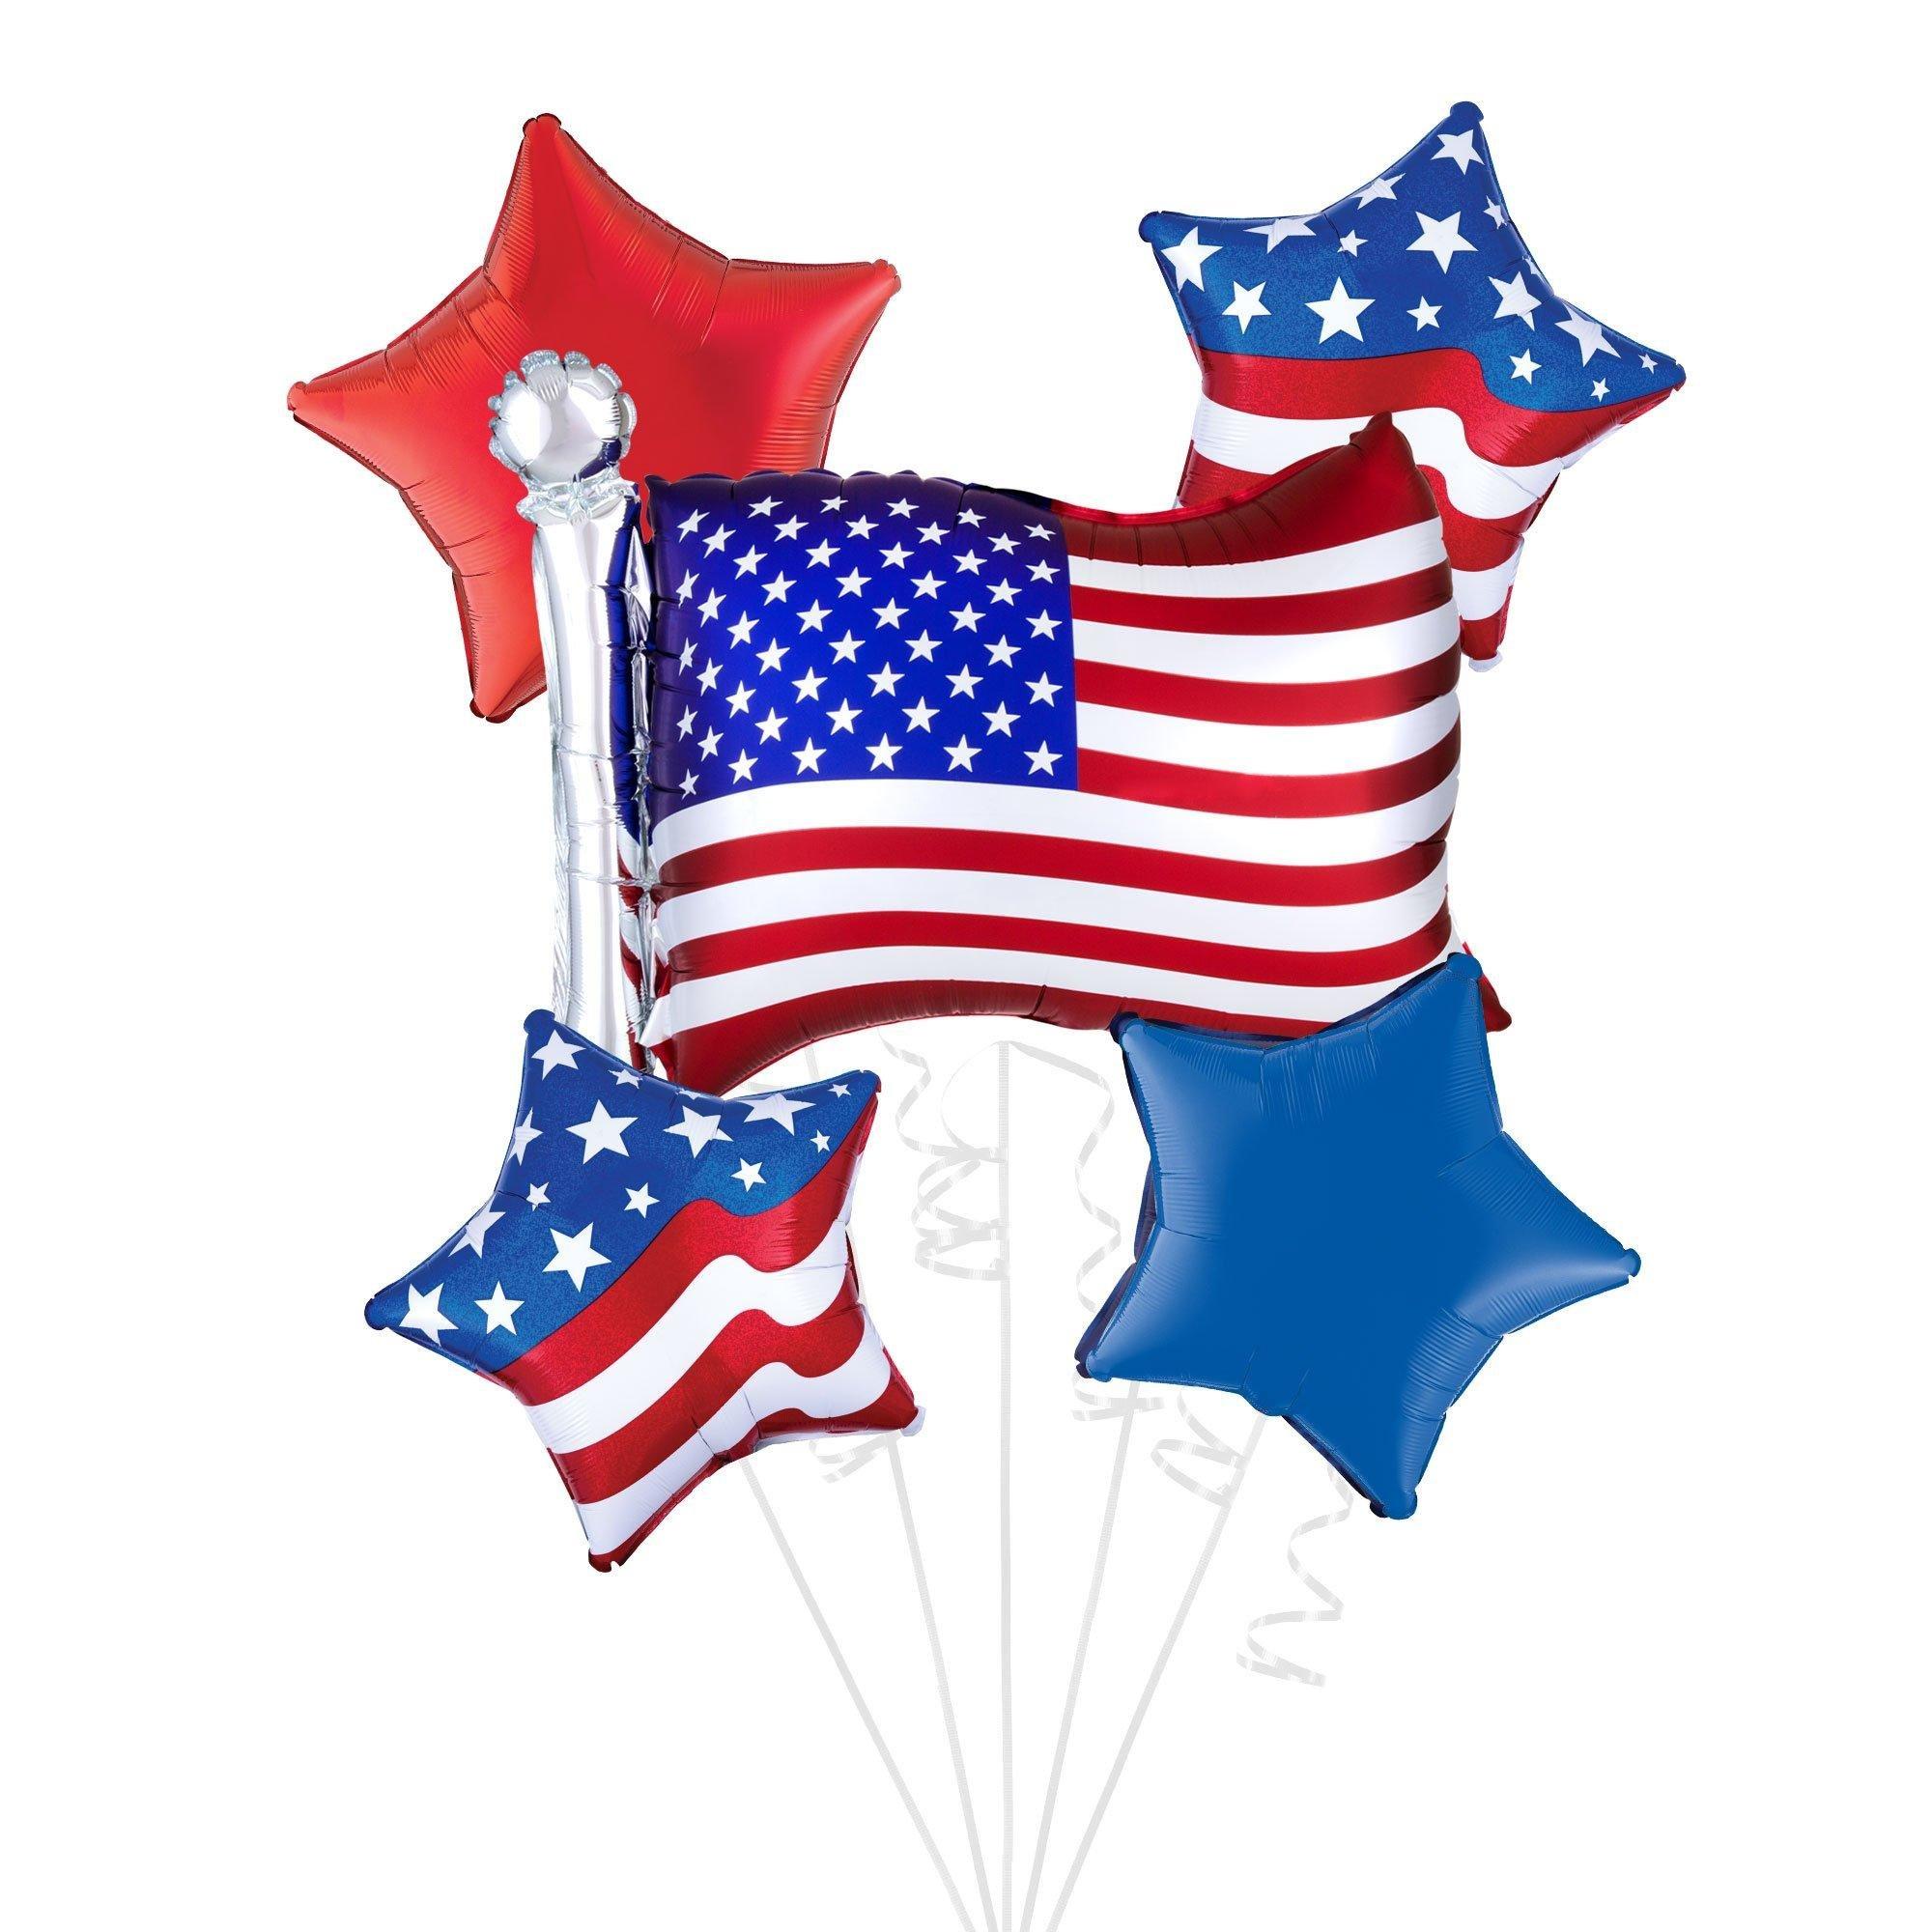 Premium Patriotic Foil Balloon Bouquet with Balloon Weight, 13pc